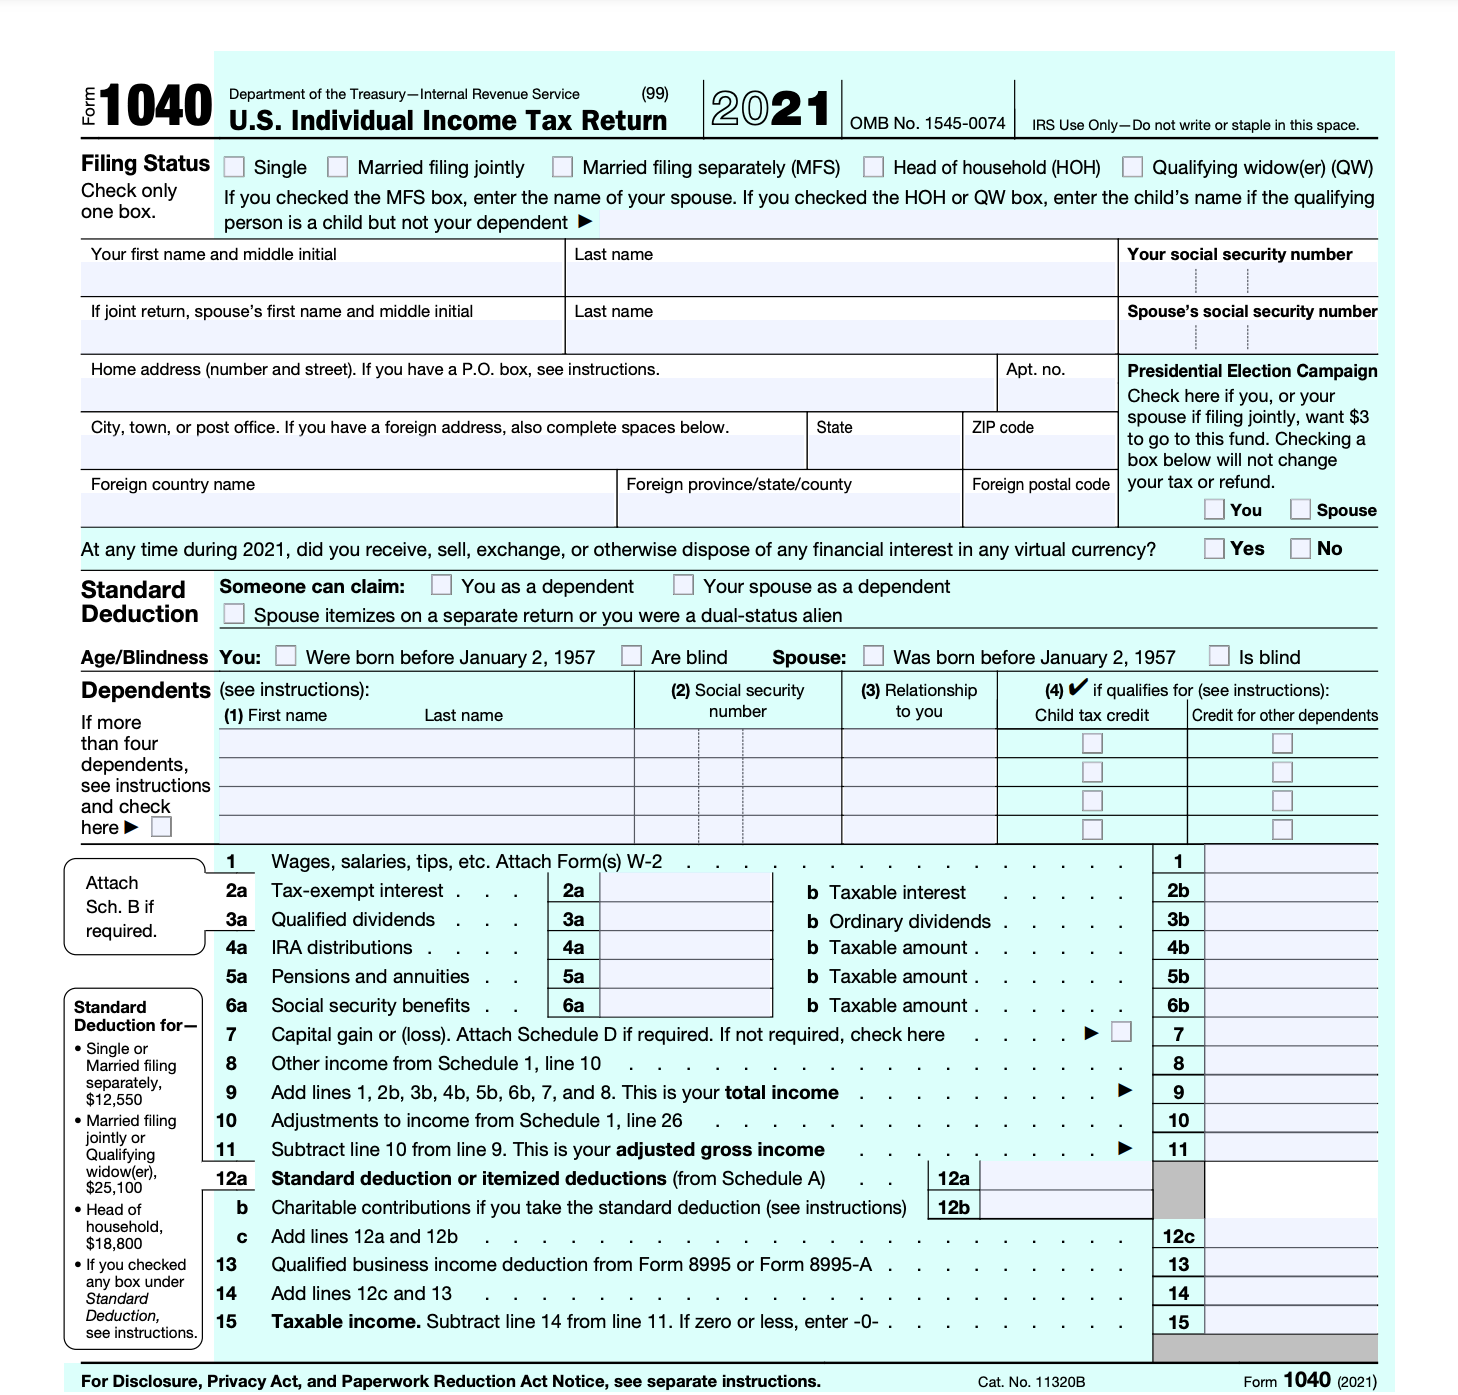 Irs Schedule 4 Instructions 2022 What Is Irs Form 1040? (Overview And Instructions) | Bench Accounting